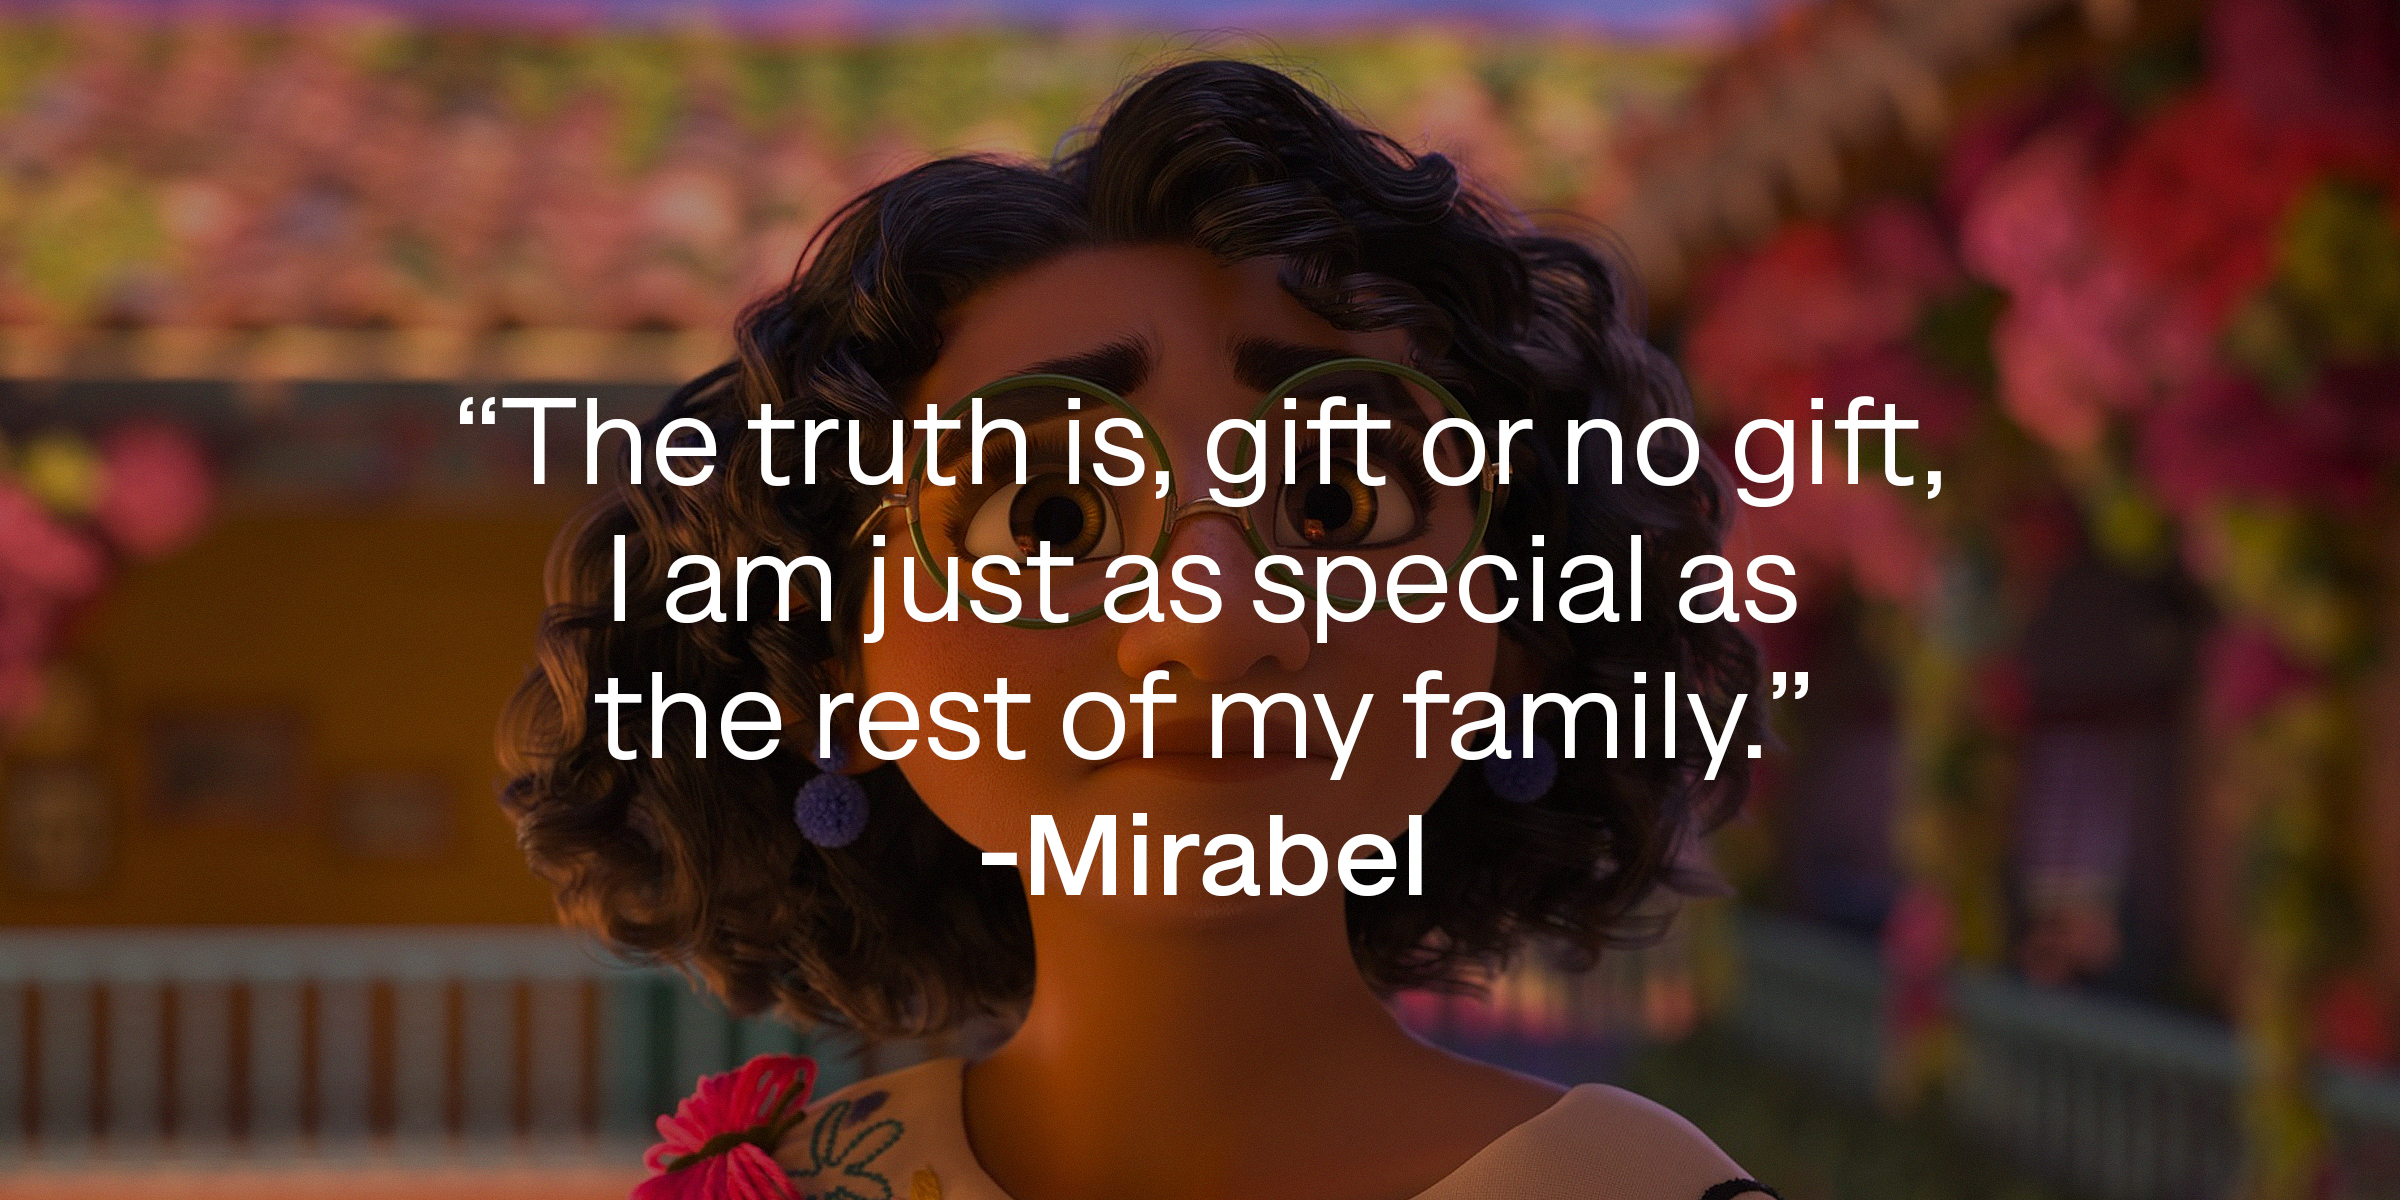 A photo of Mirabel with Mirabel's quote: "The truth is, gift or no gift, I am just as special as the rest of my family." | Source: Facebook.com/EncantoMovie